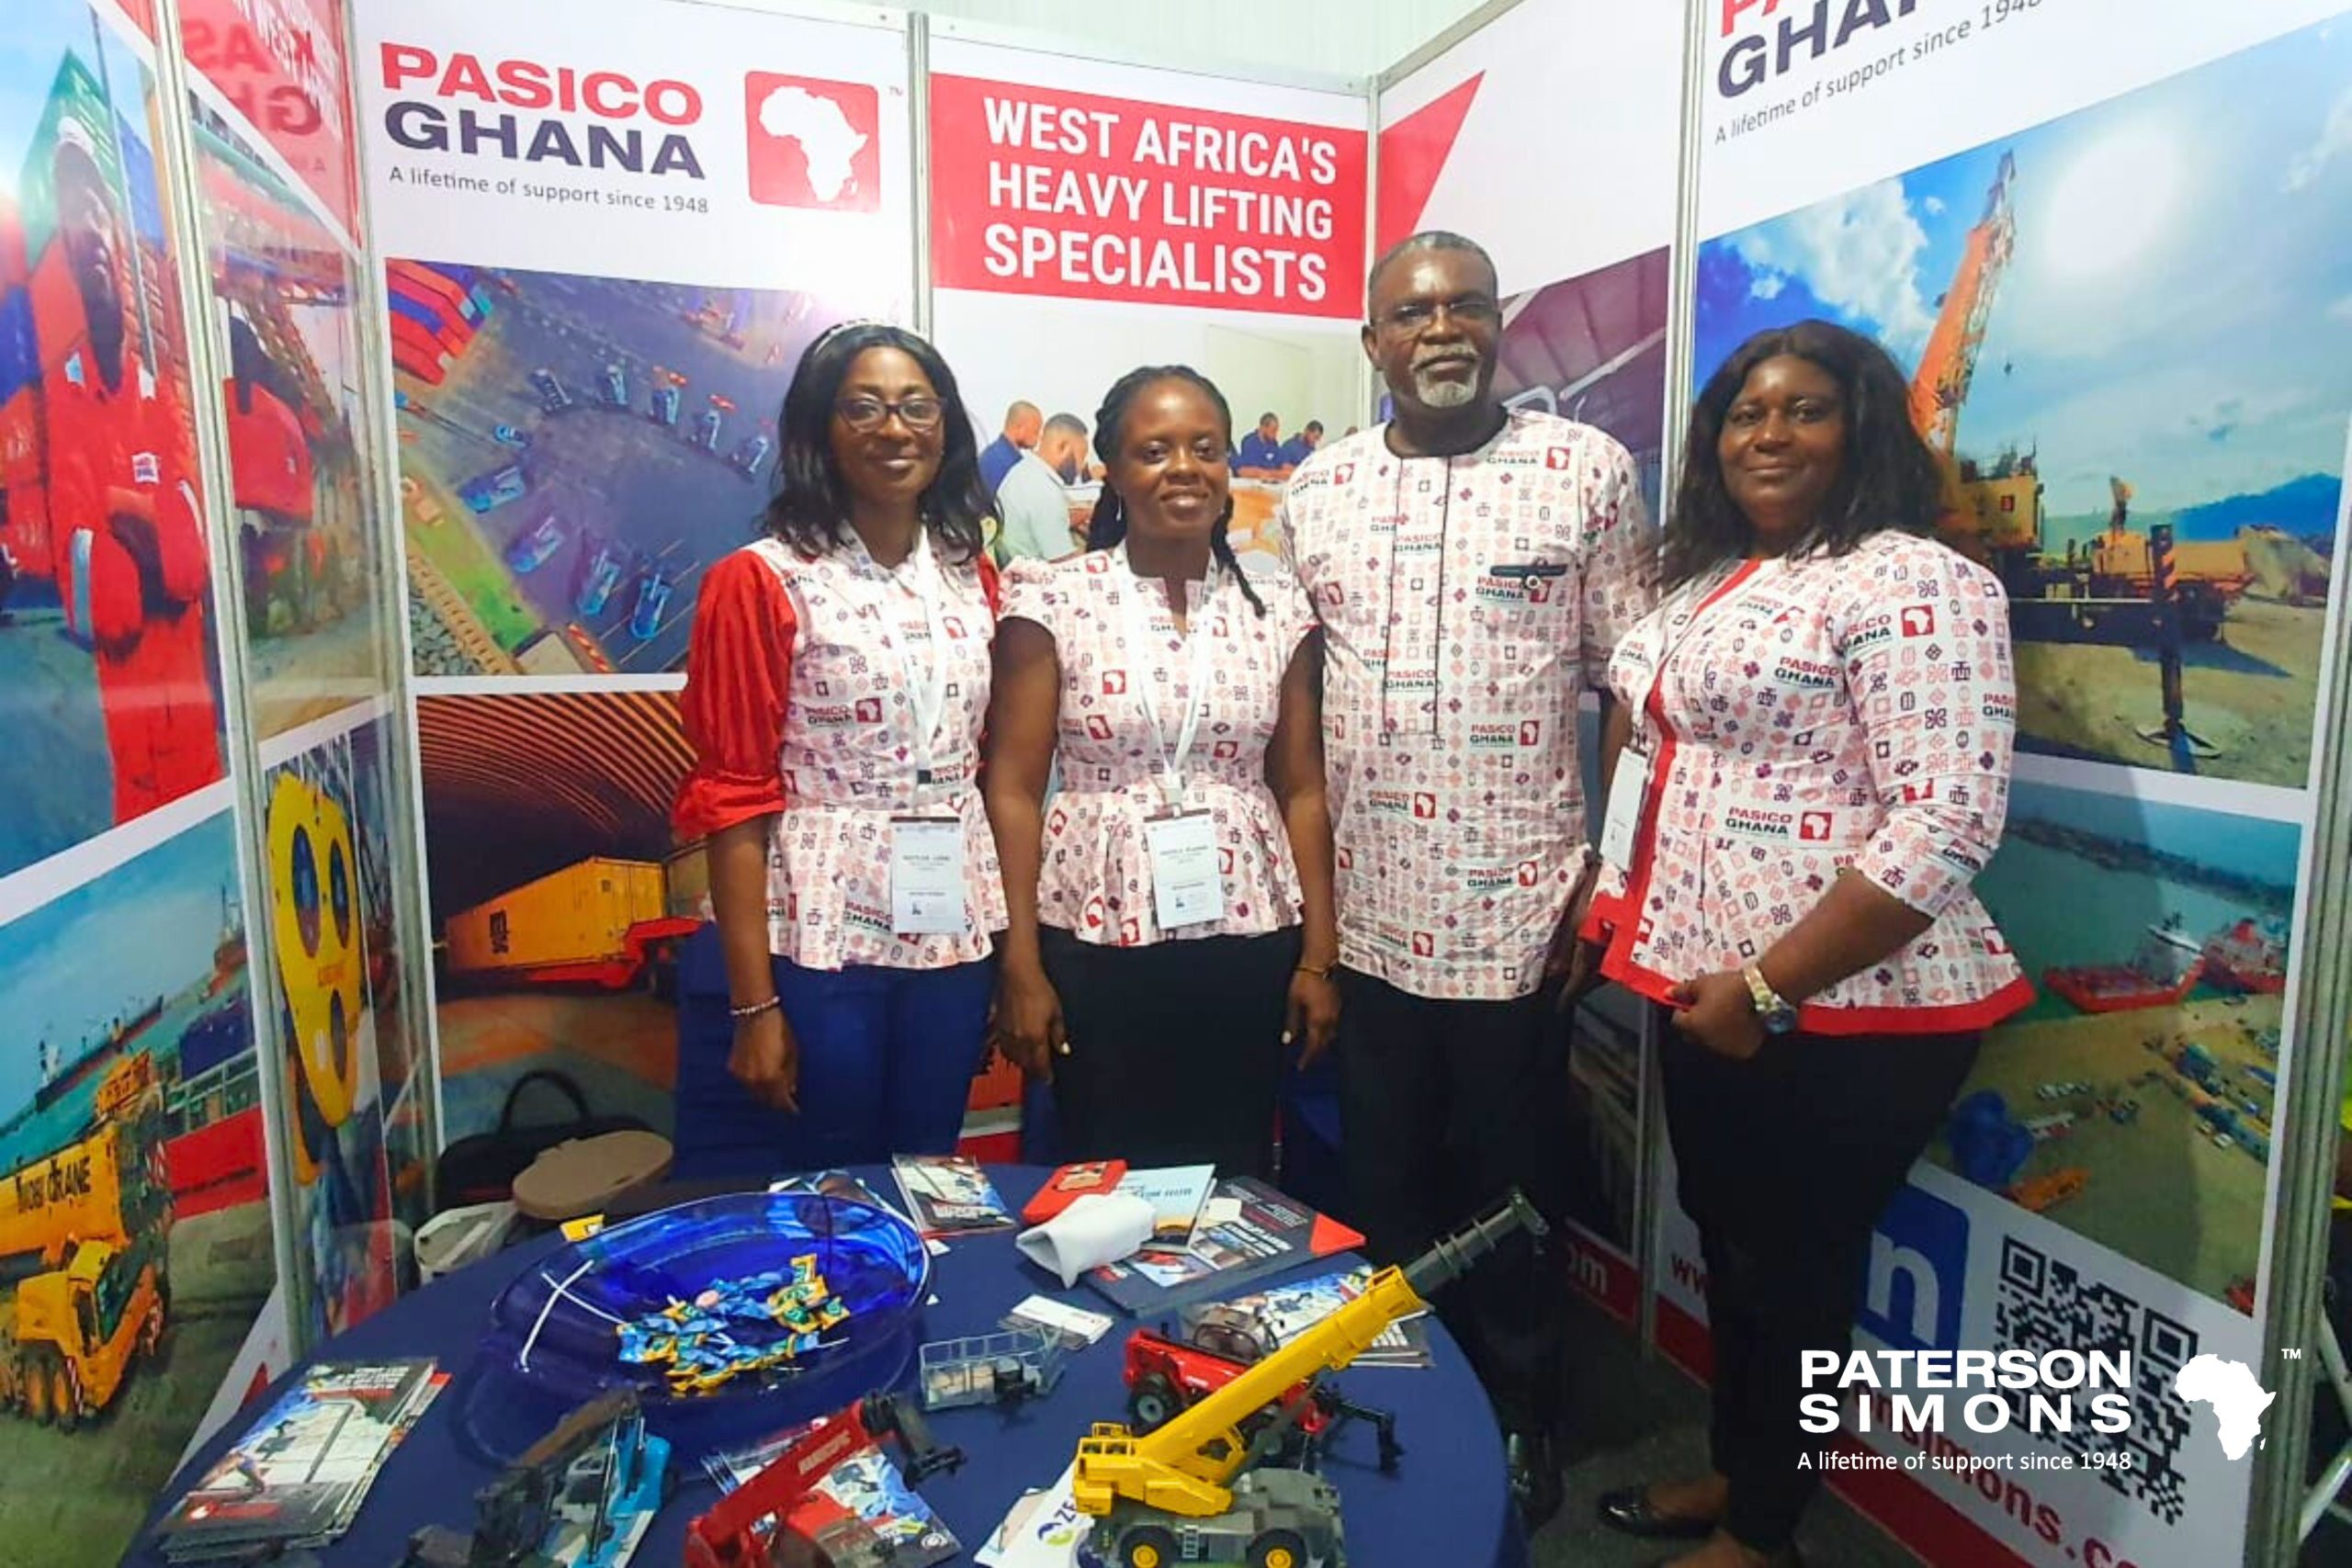 PASICO GHANA ATTENDS THE 9th ANNUAL LOCAL CONTENT CONFERENCE AND EXHIBITION IN TAKORADI, GHANA!